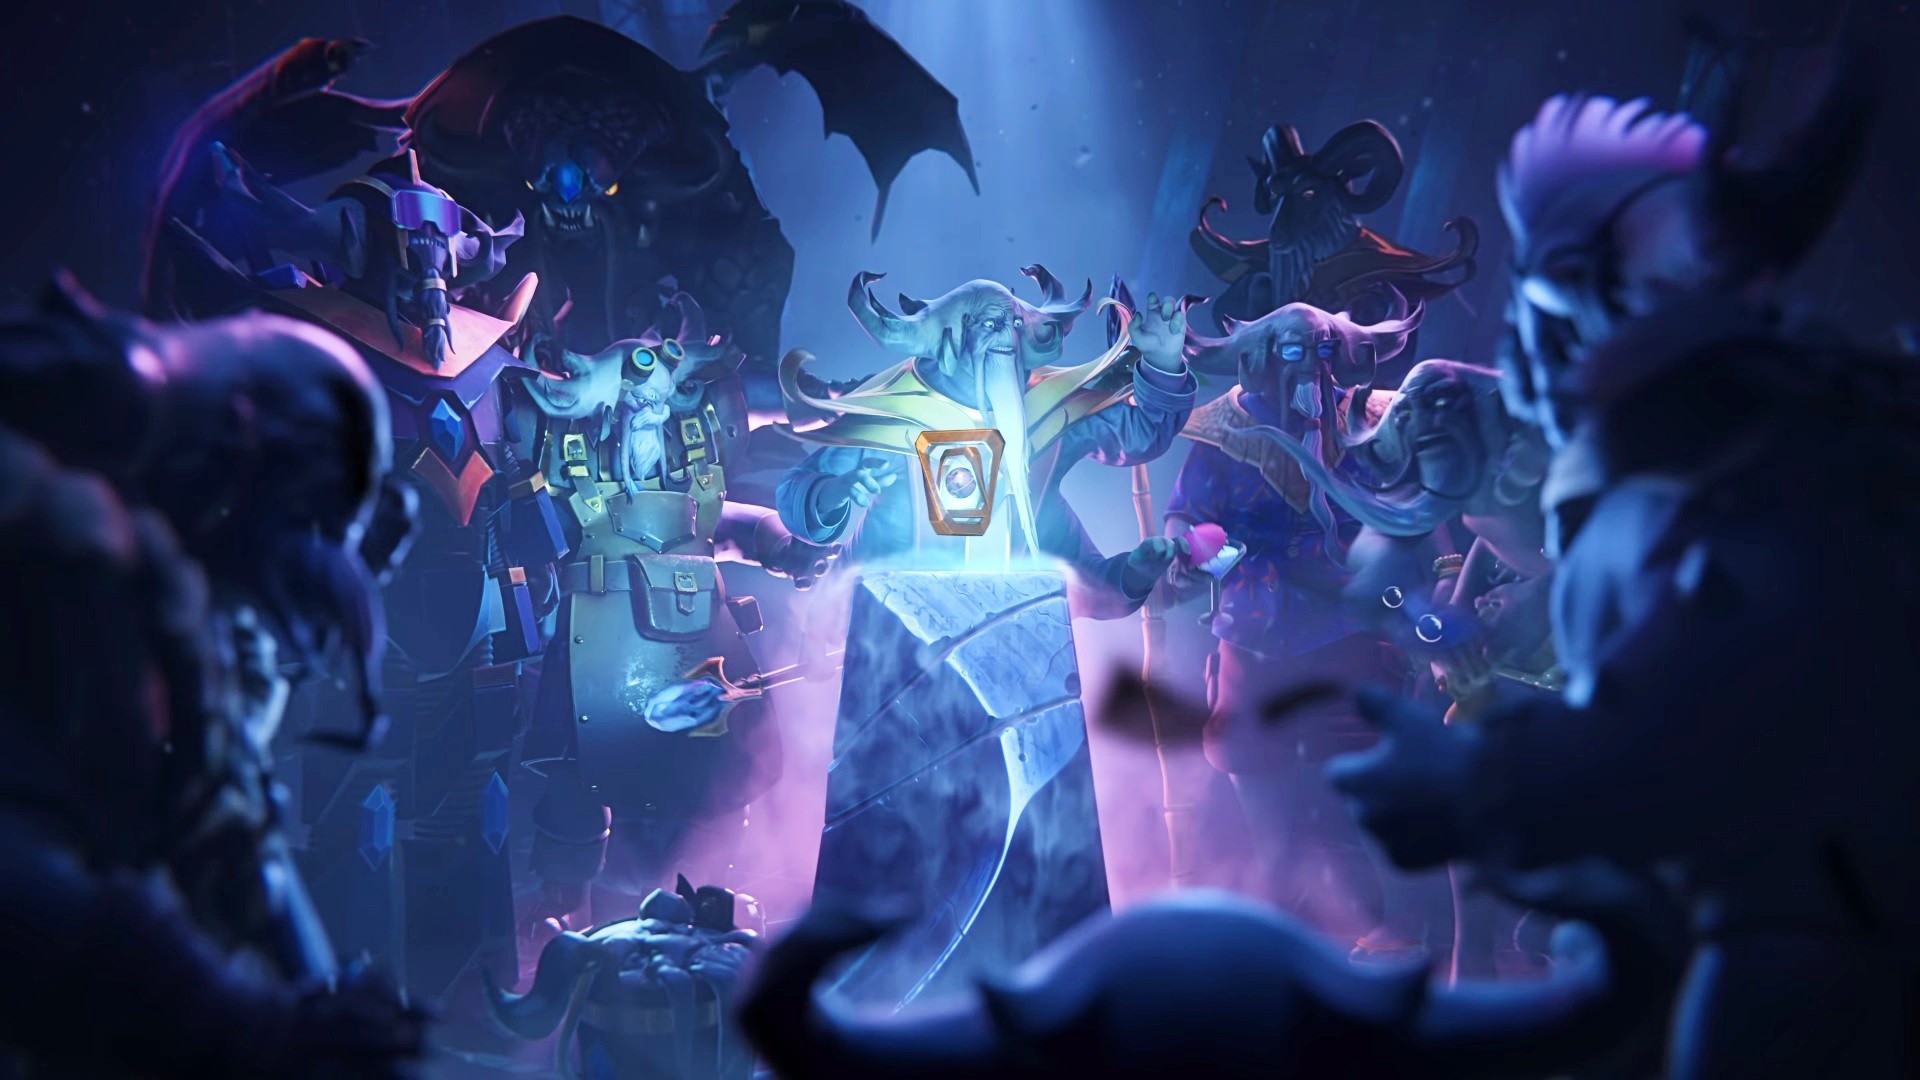 Dota 2's Aghanim's Labyrinth mode is back with a new battle pass